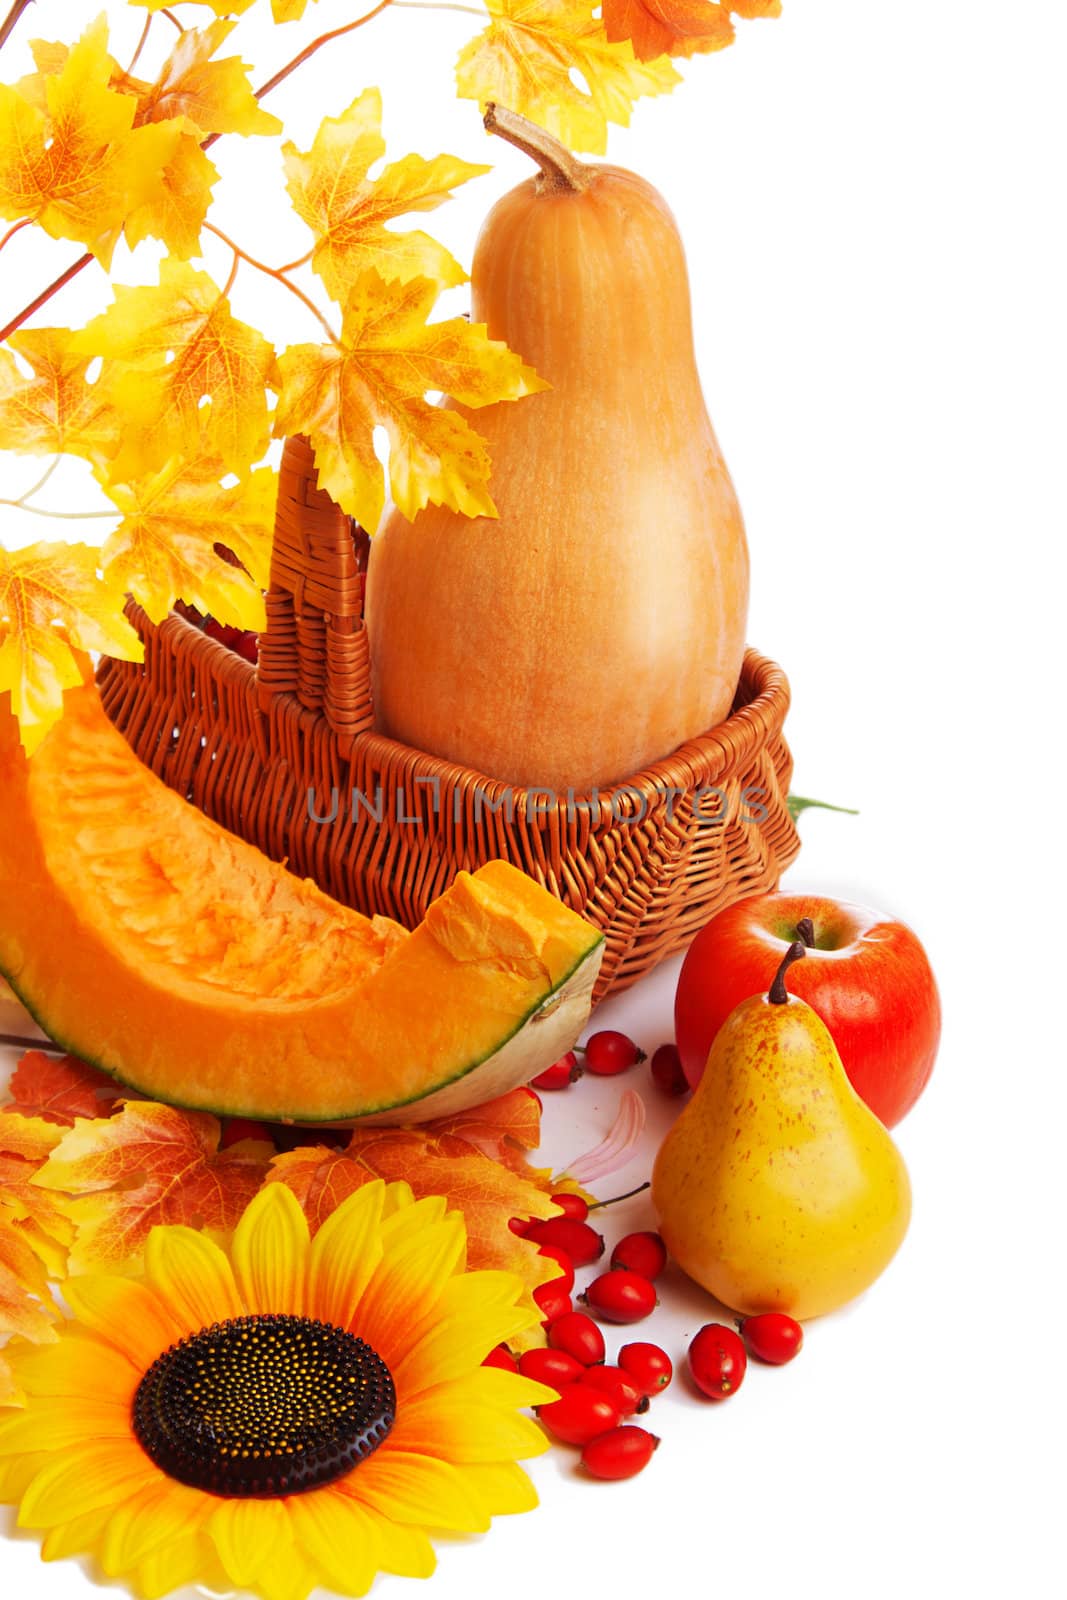 Autum harvest fruits and vegetables in basket with yellow leaves isolated on white